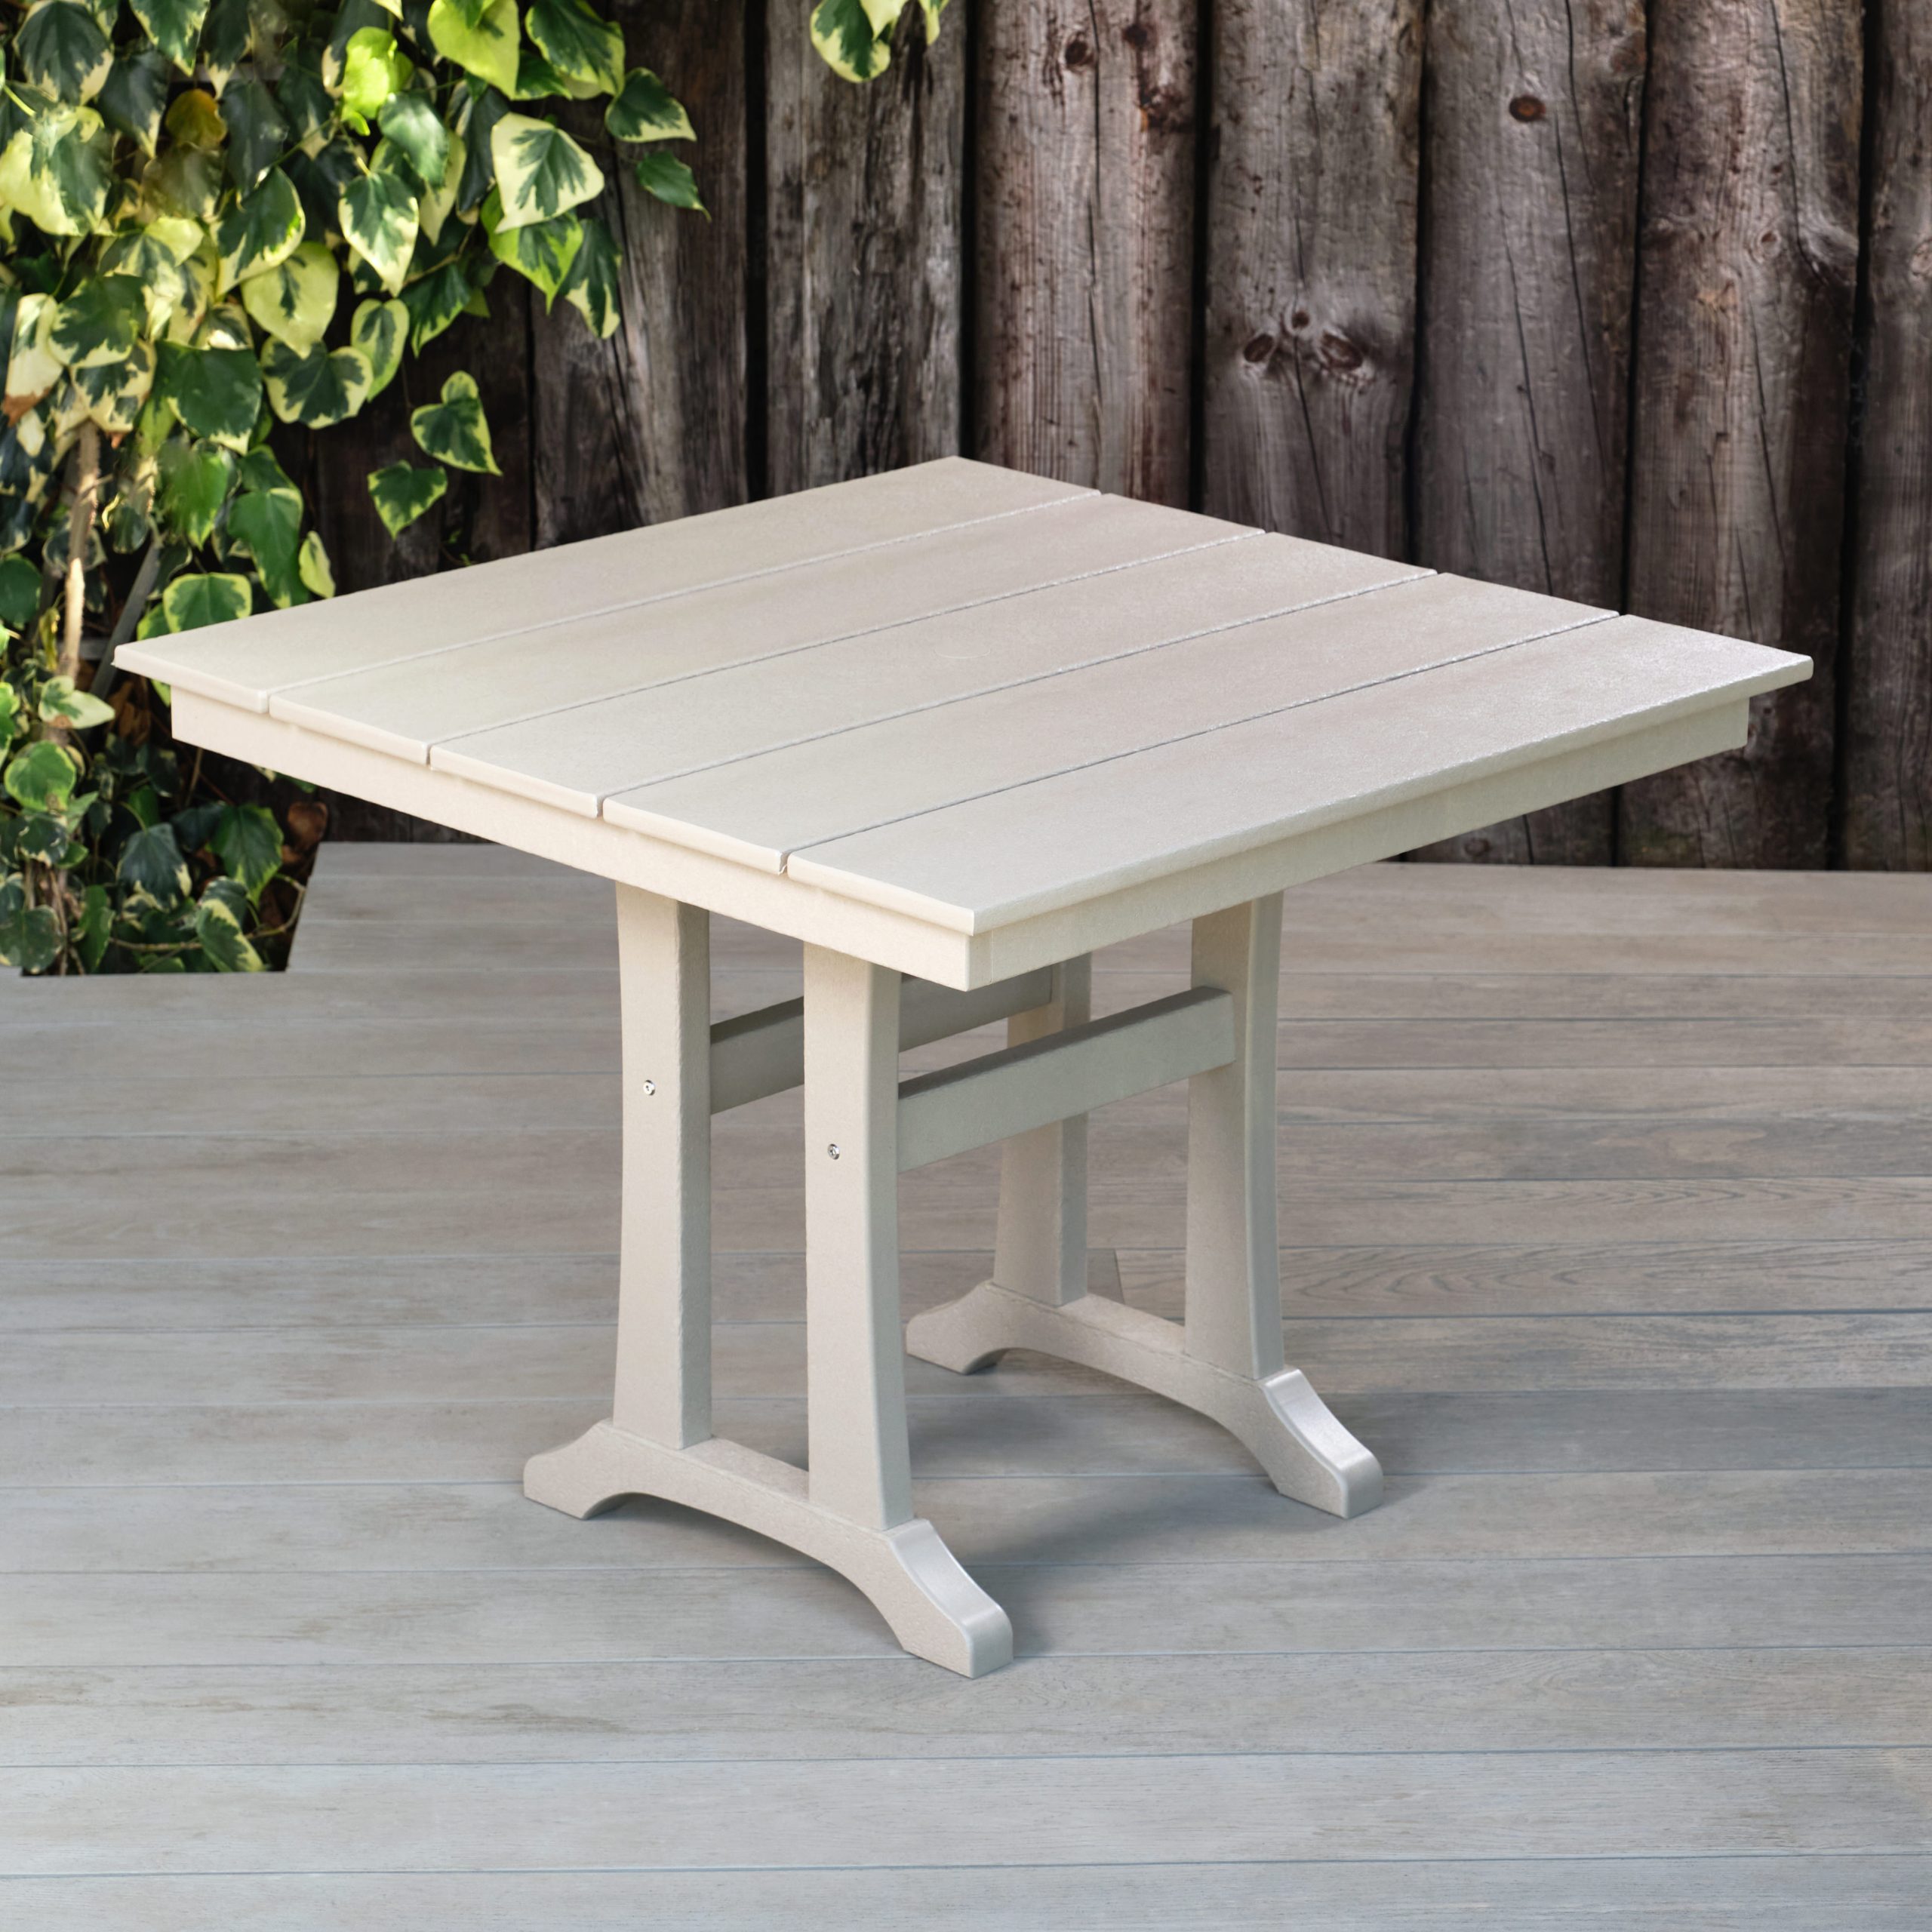 GDSTS Recycled Plastic Table Sand